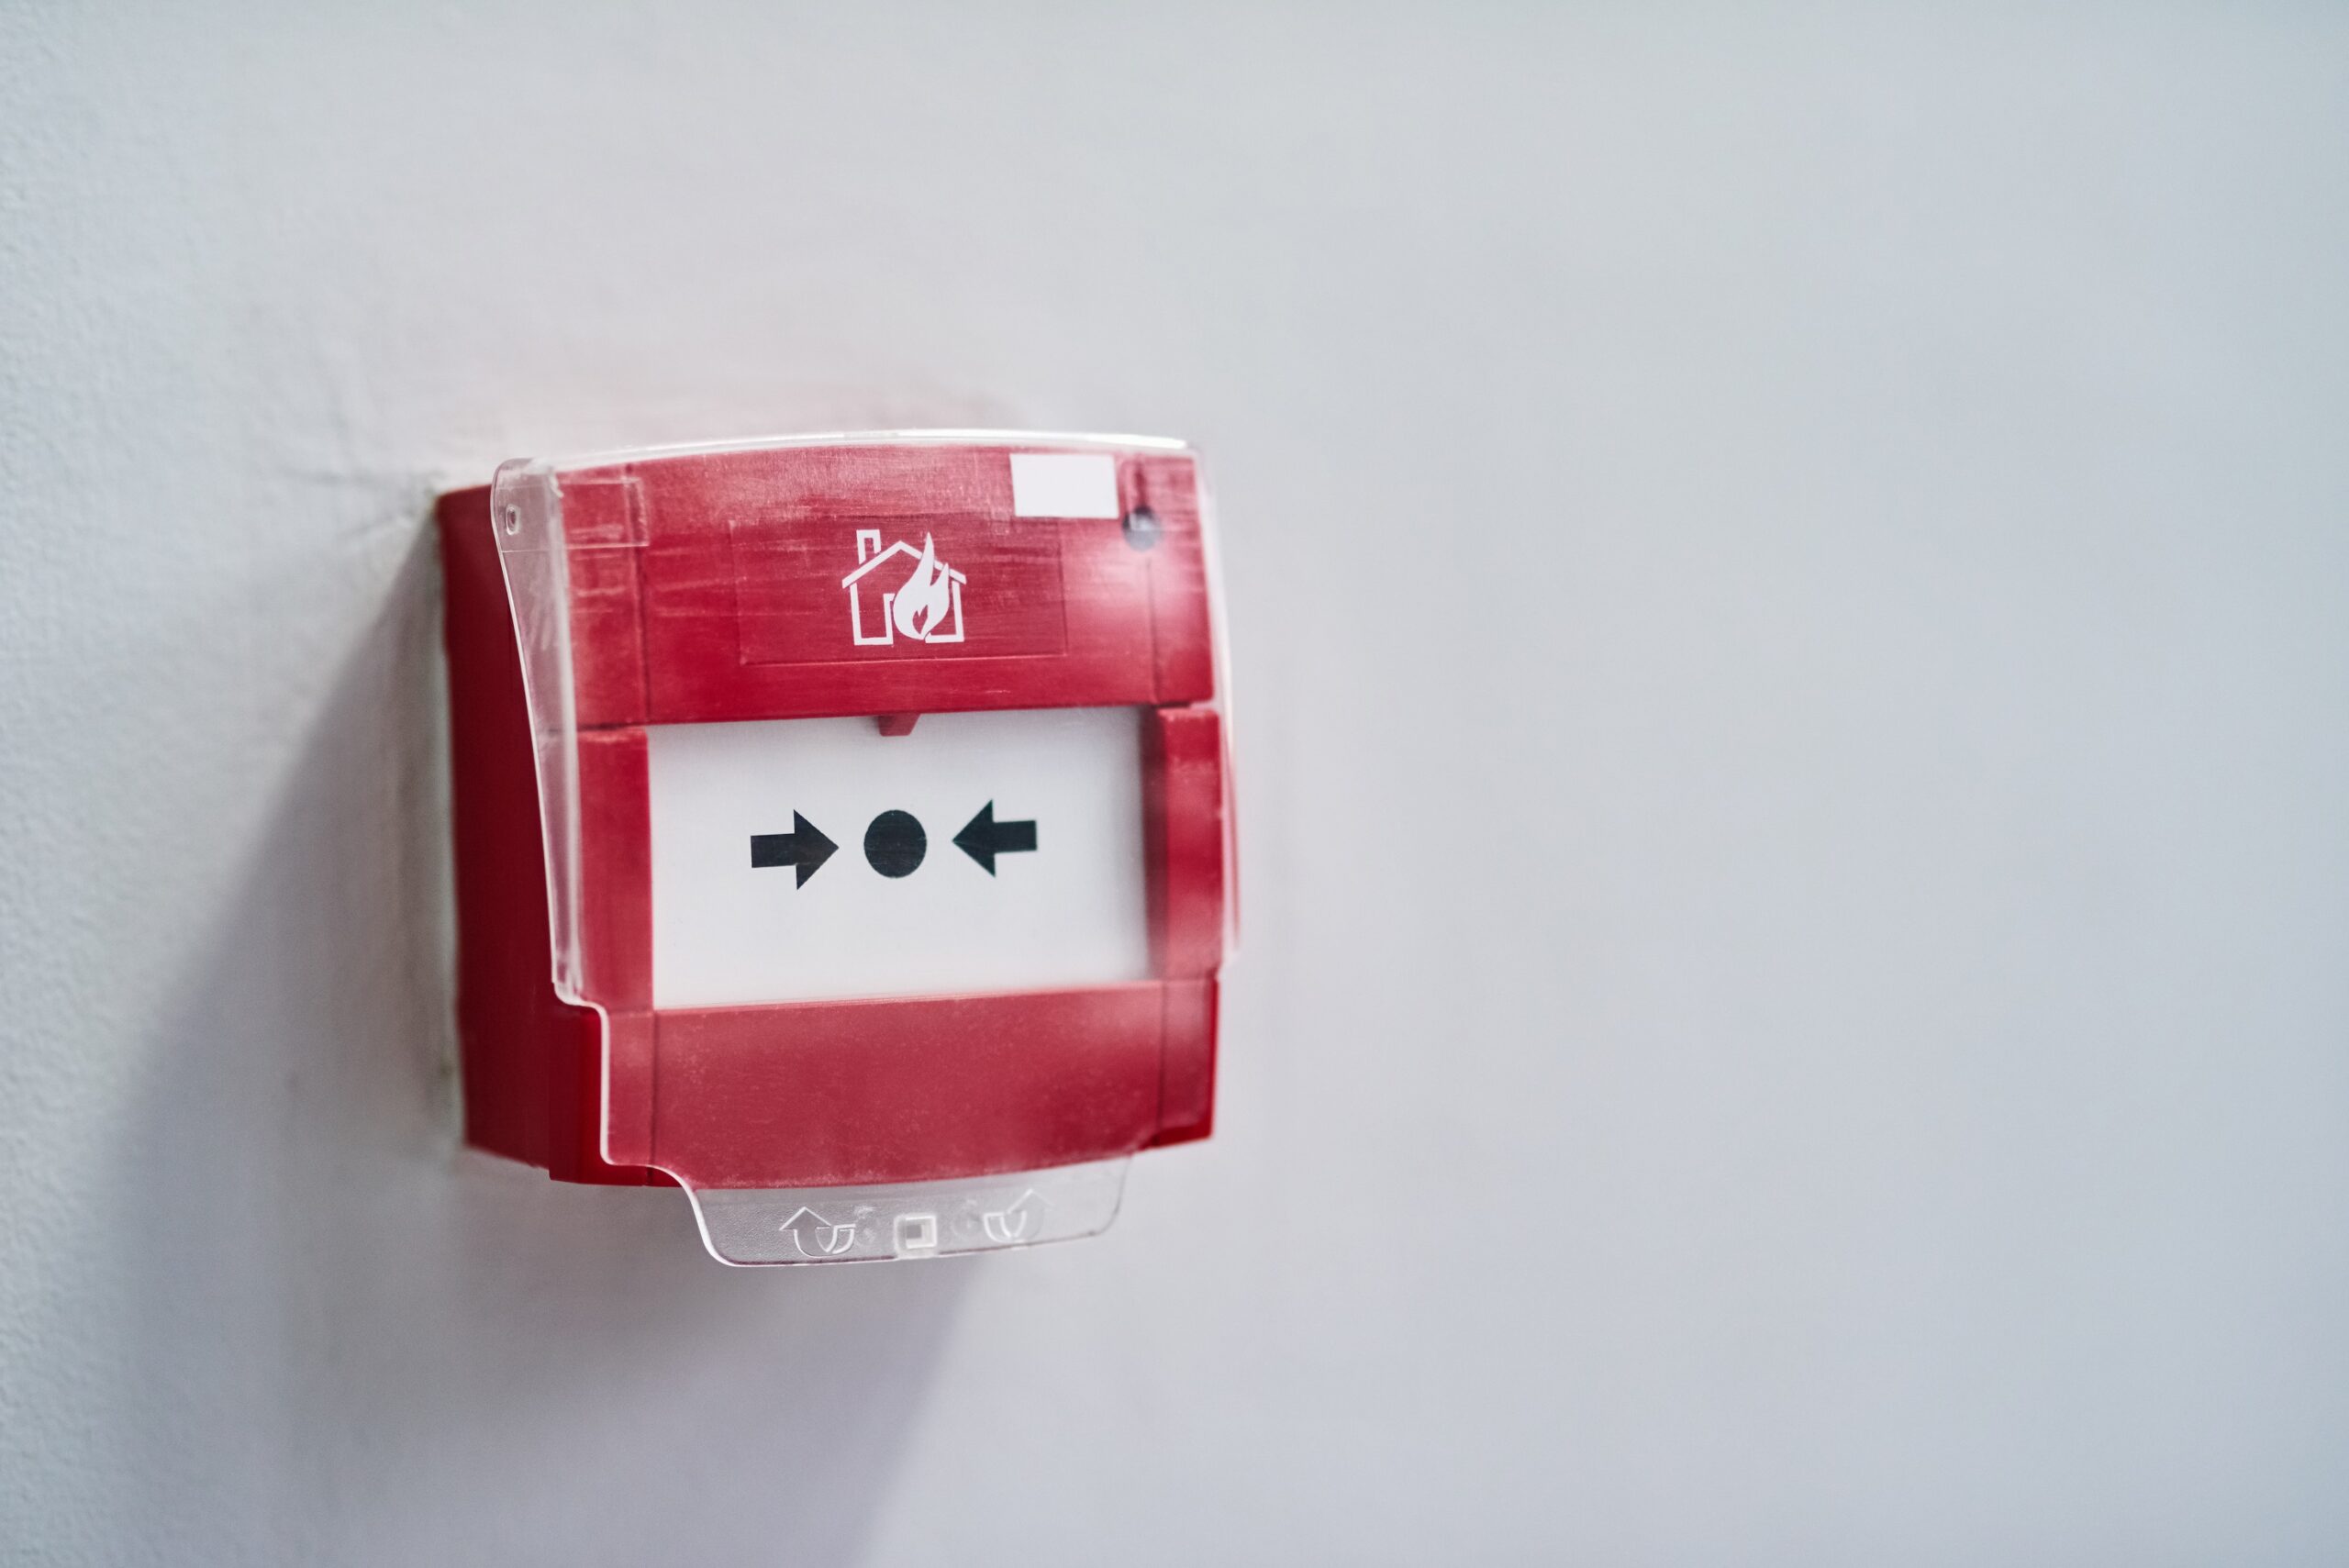 Sound the alarm. Shot of a fire alarm on a wall